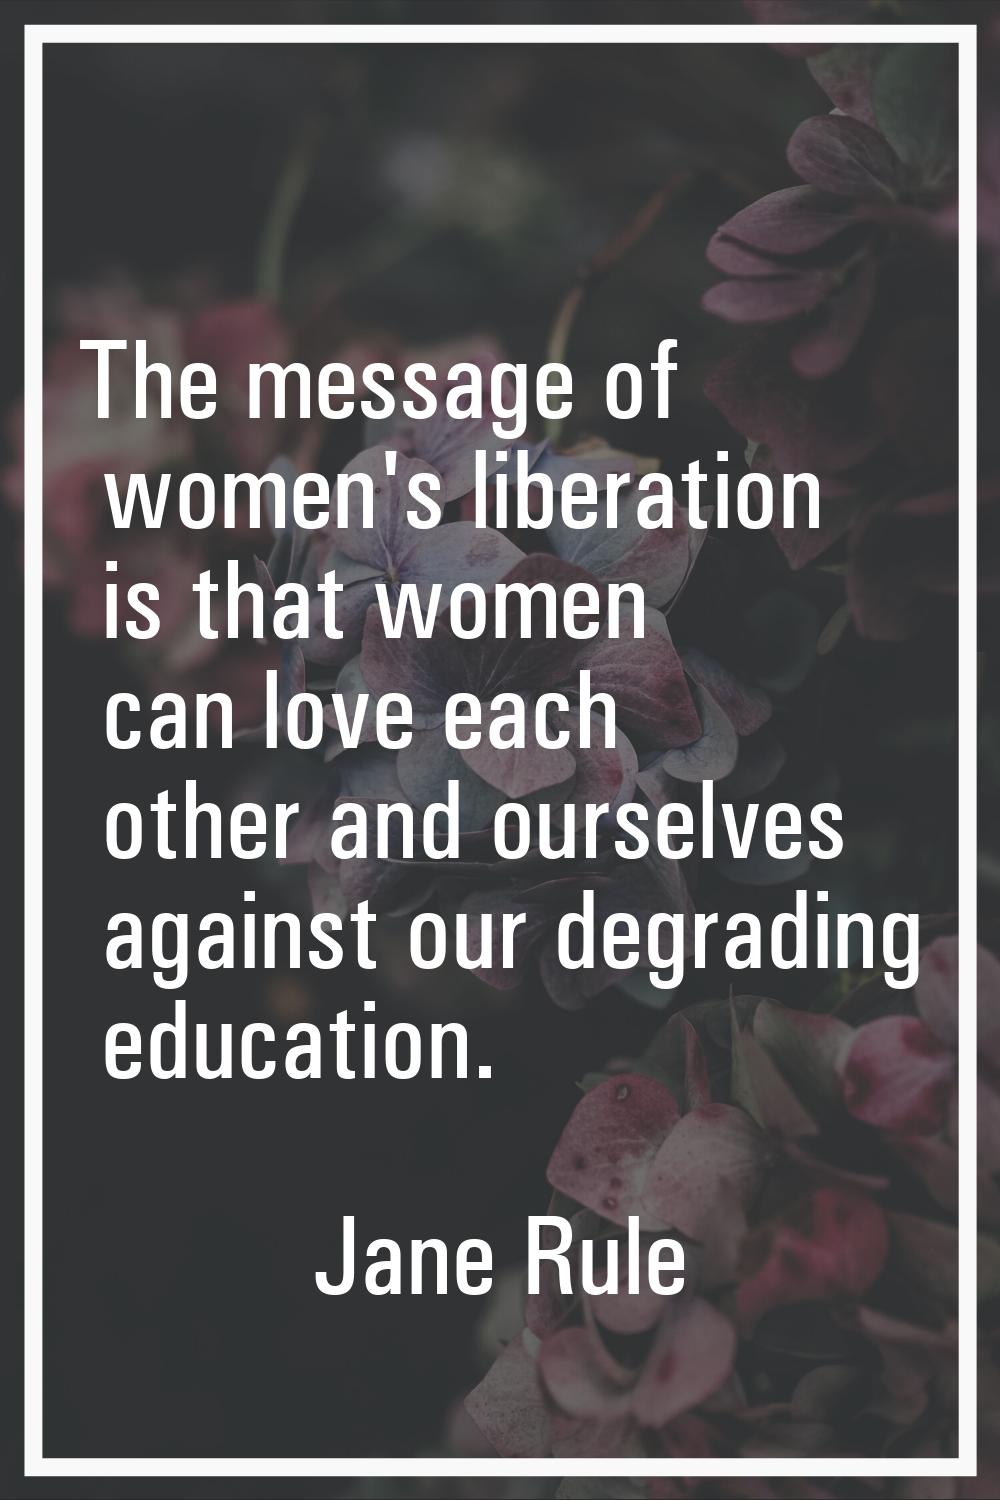 The message of women's liberation is that women can love each other and ourselves against our degra